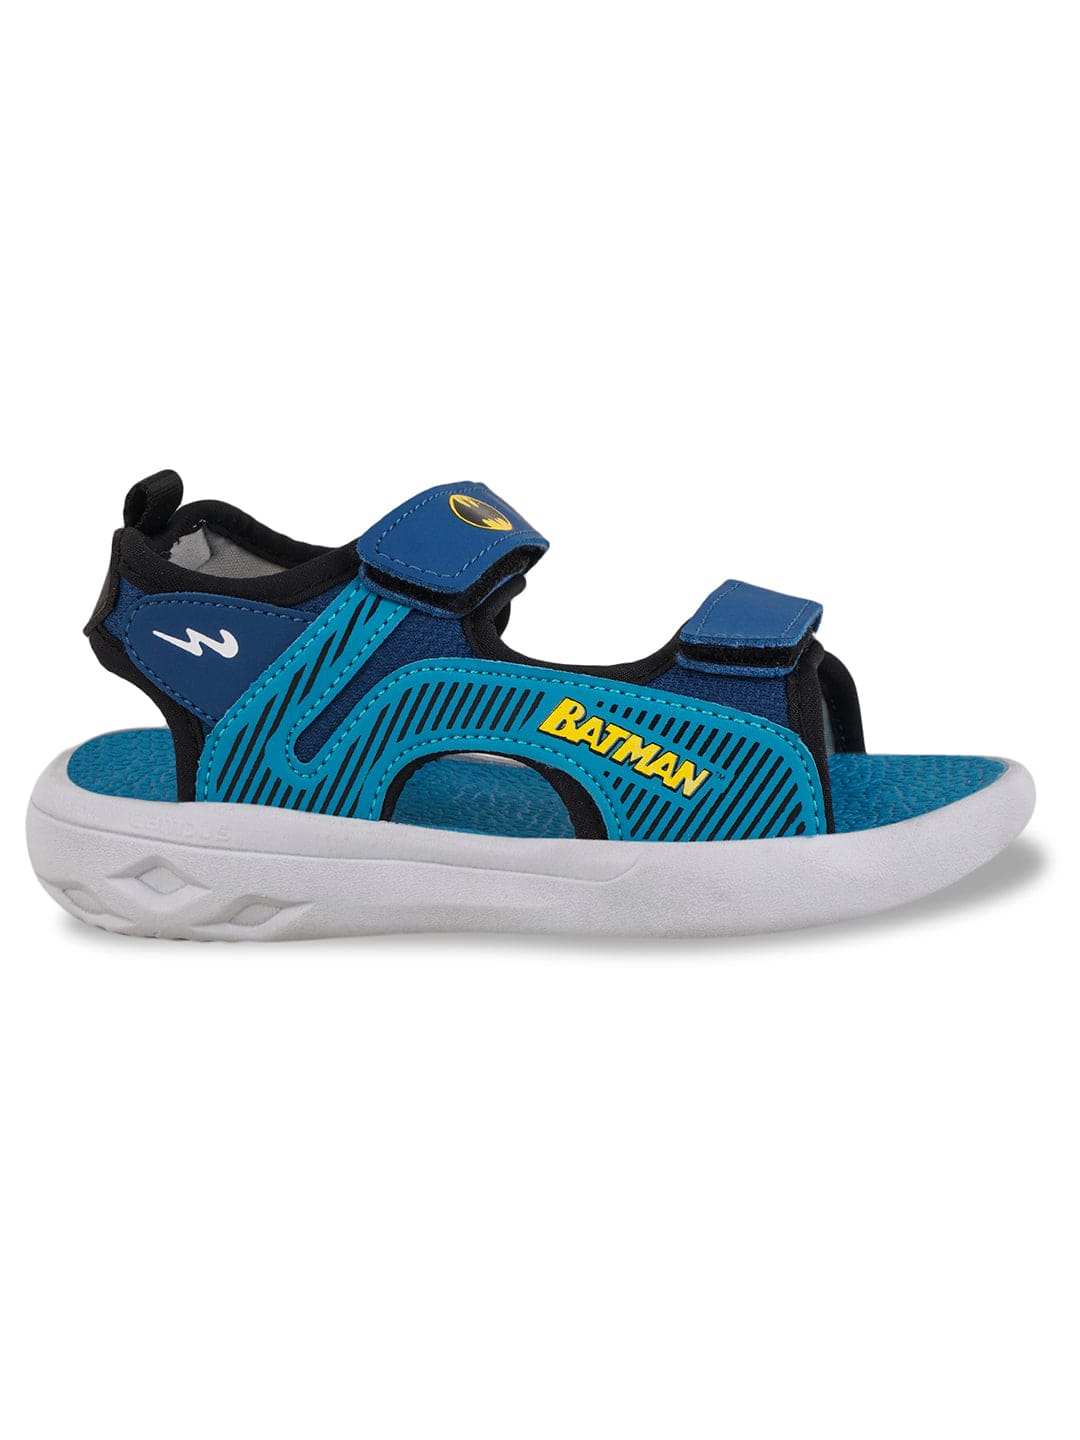 Buy Bata Boys' Shoes Online at Best Prices in Bangladesh - Daraz.com.bd